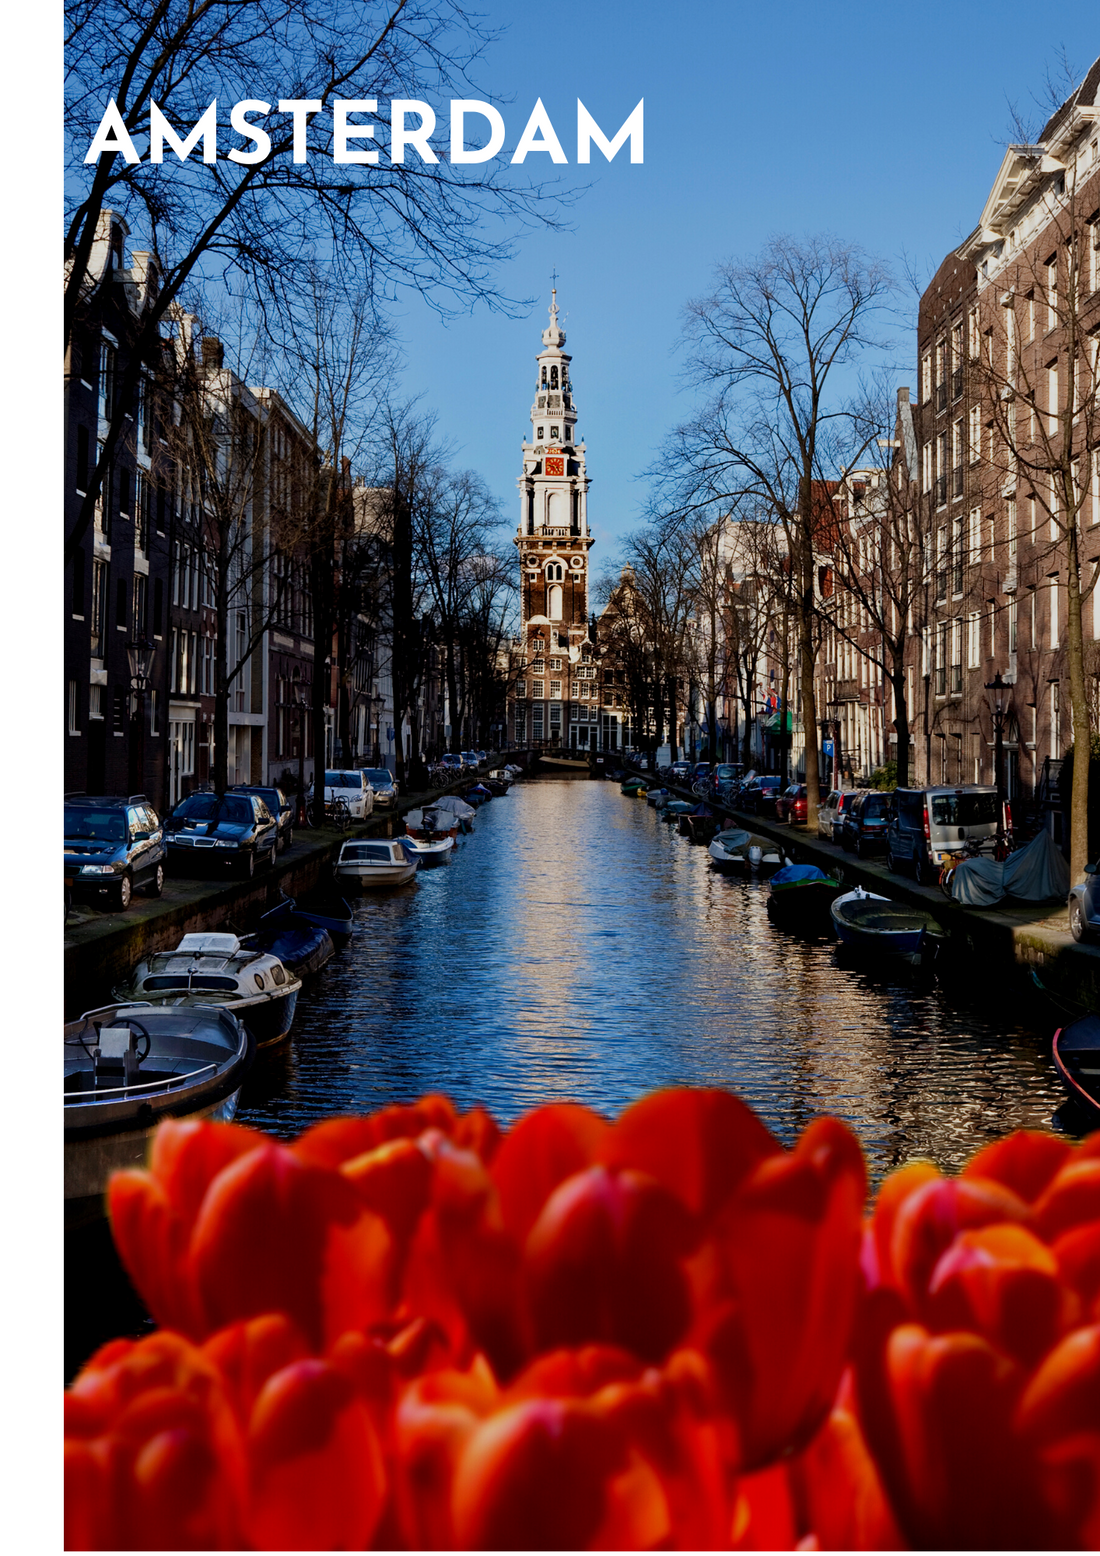 ARE YOU READY FOR A QUICK TOUR IN AMSTERDAM?